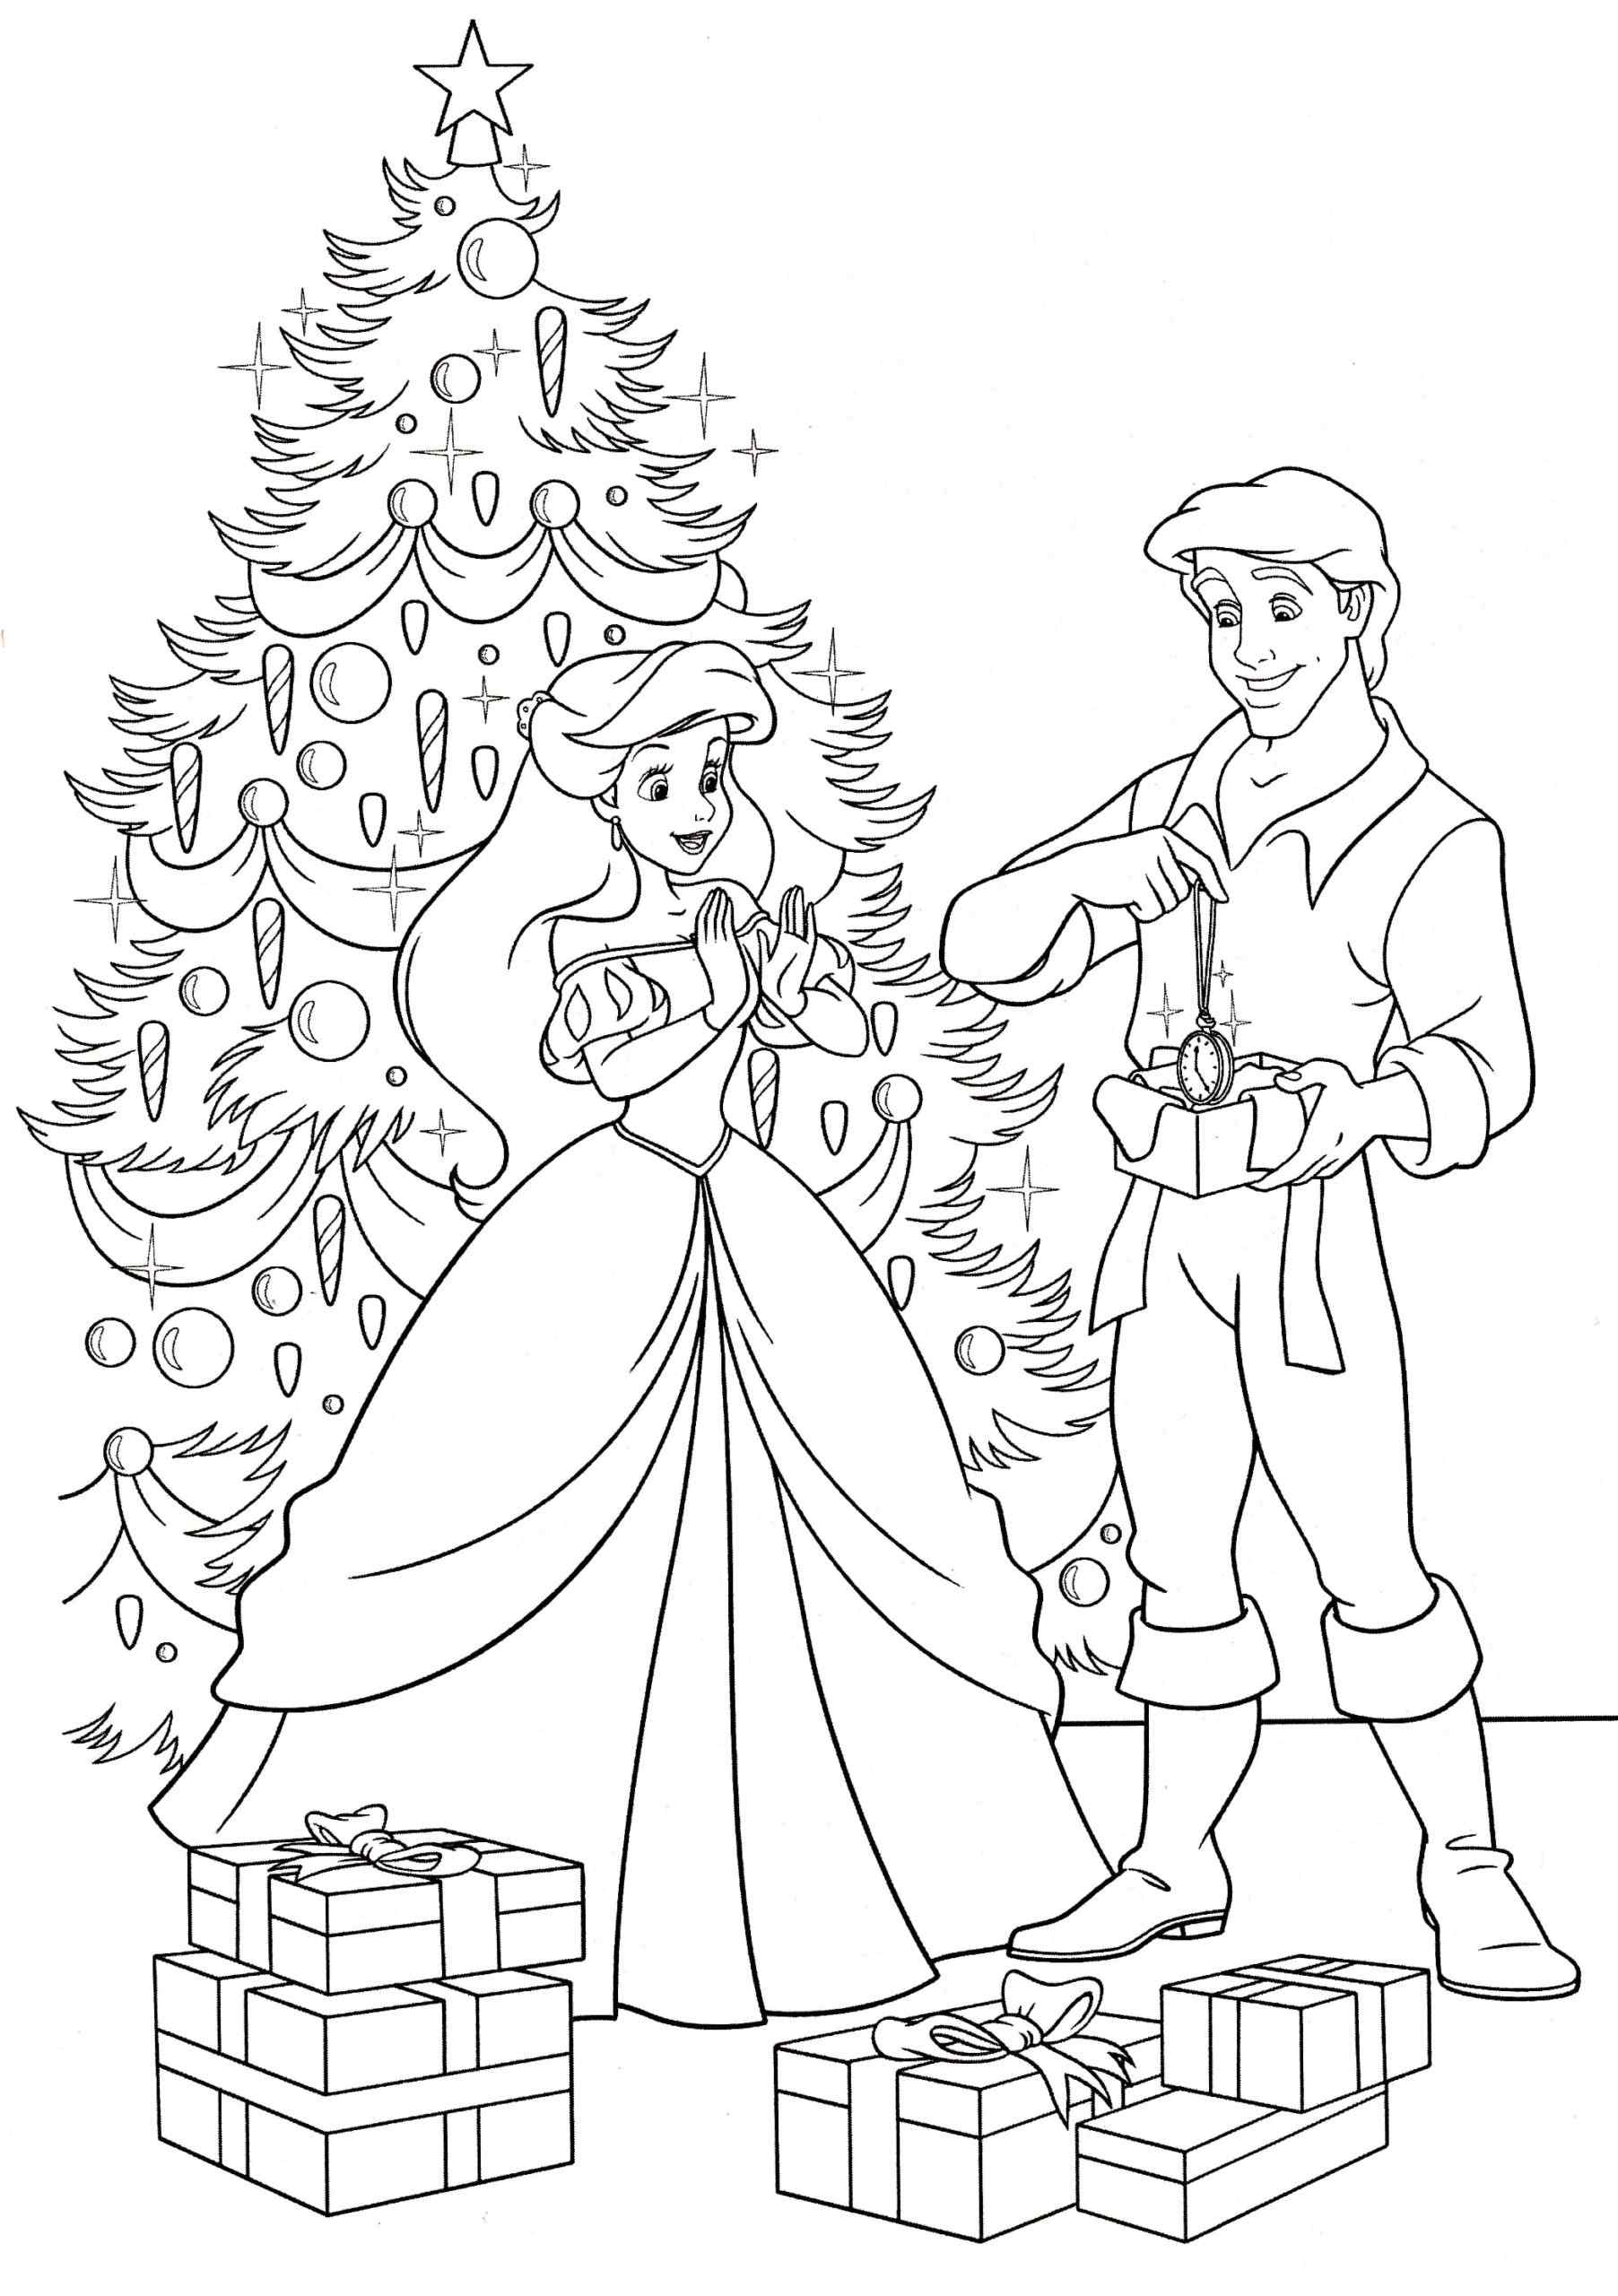 Surprised Princess In Christmas Coloring Pages   Coloring Cool